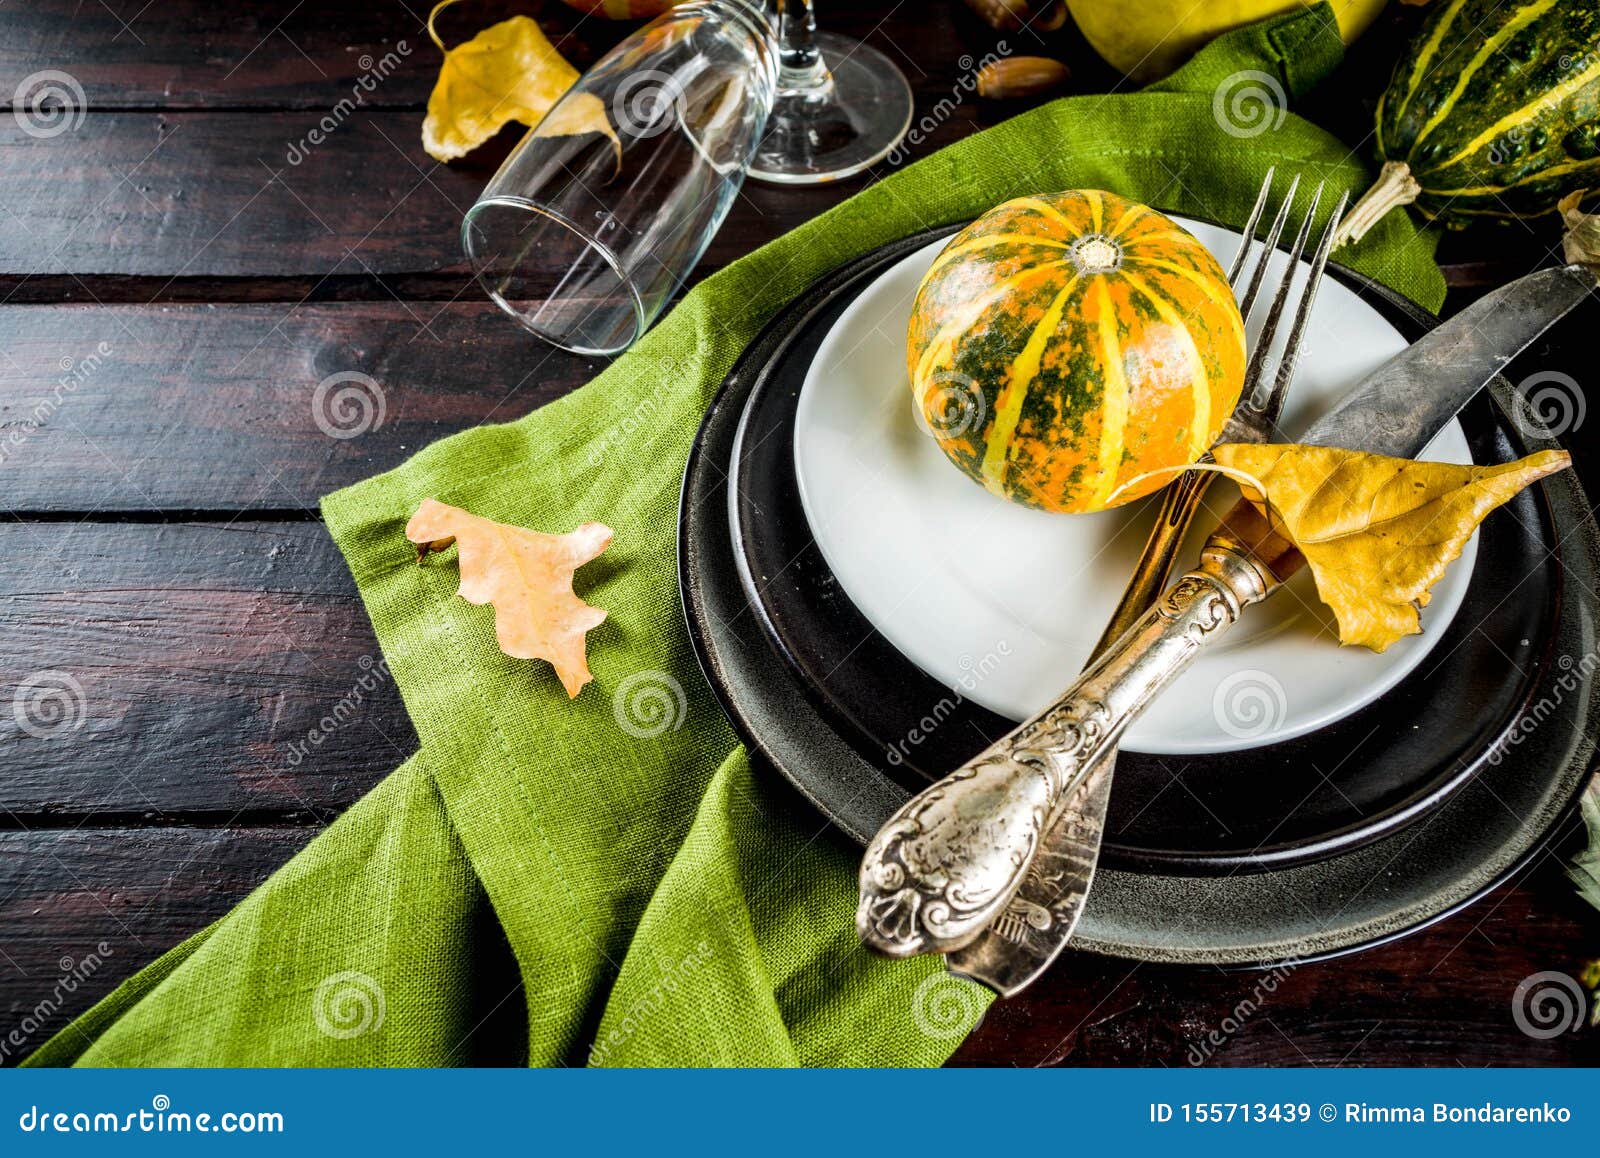 Autumn and Thanksgiving Table Setting Stock Image - Image of plate ...